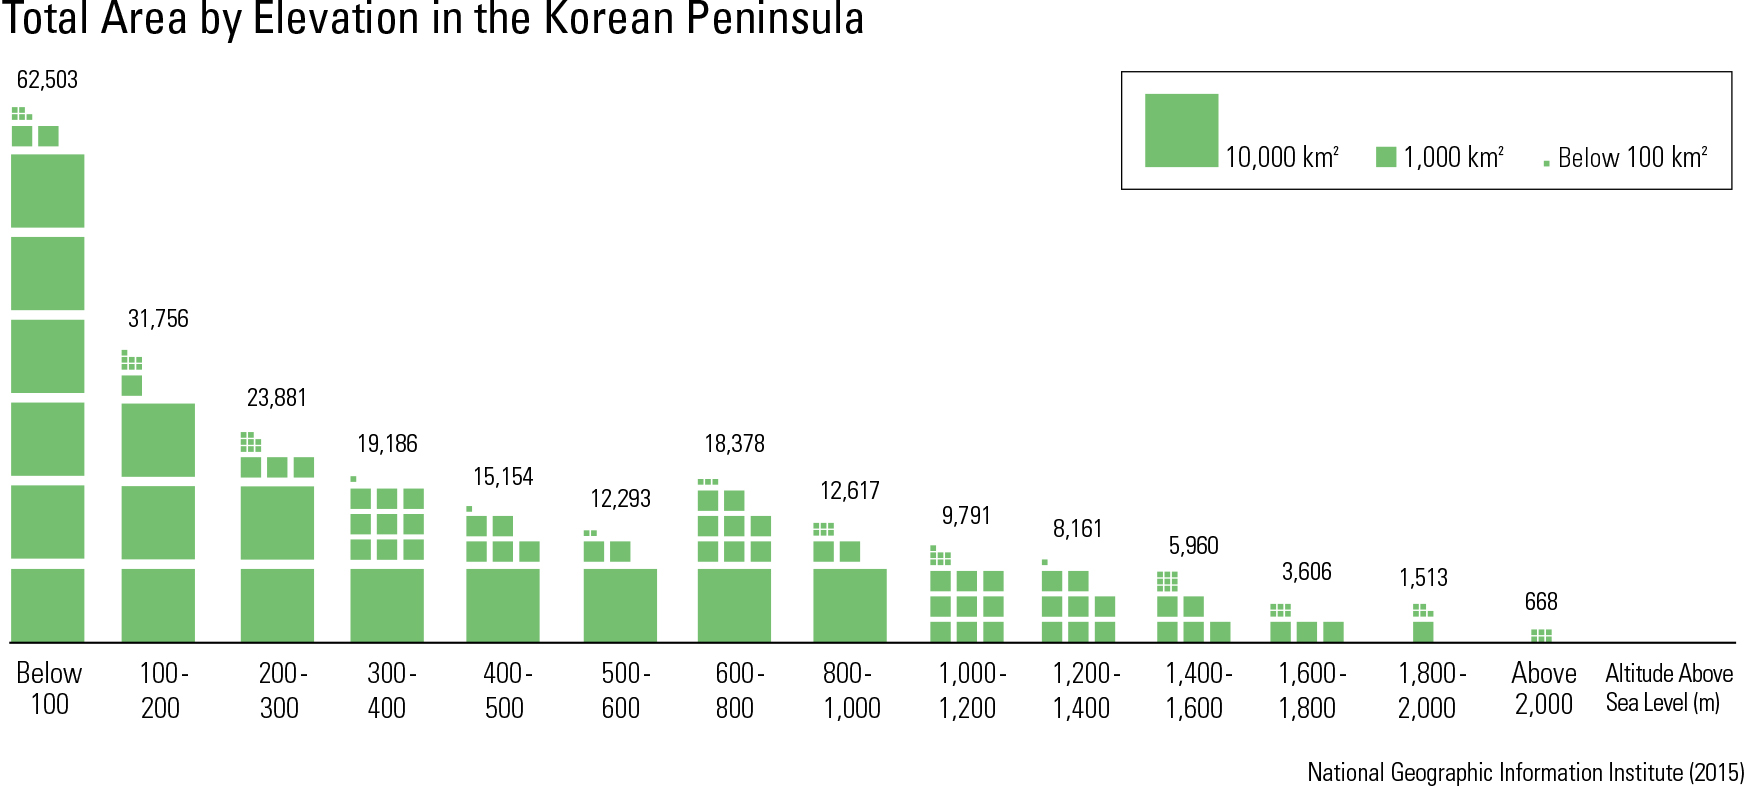  Total Area by Elevation in the Korean Peninsula